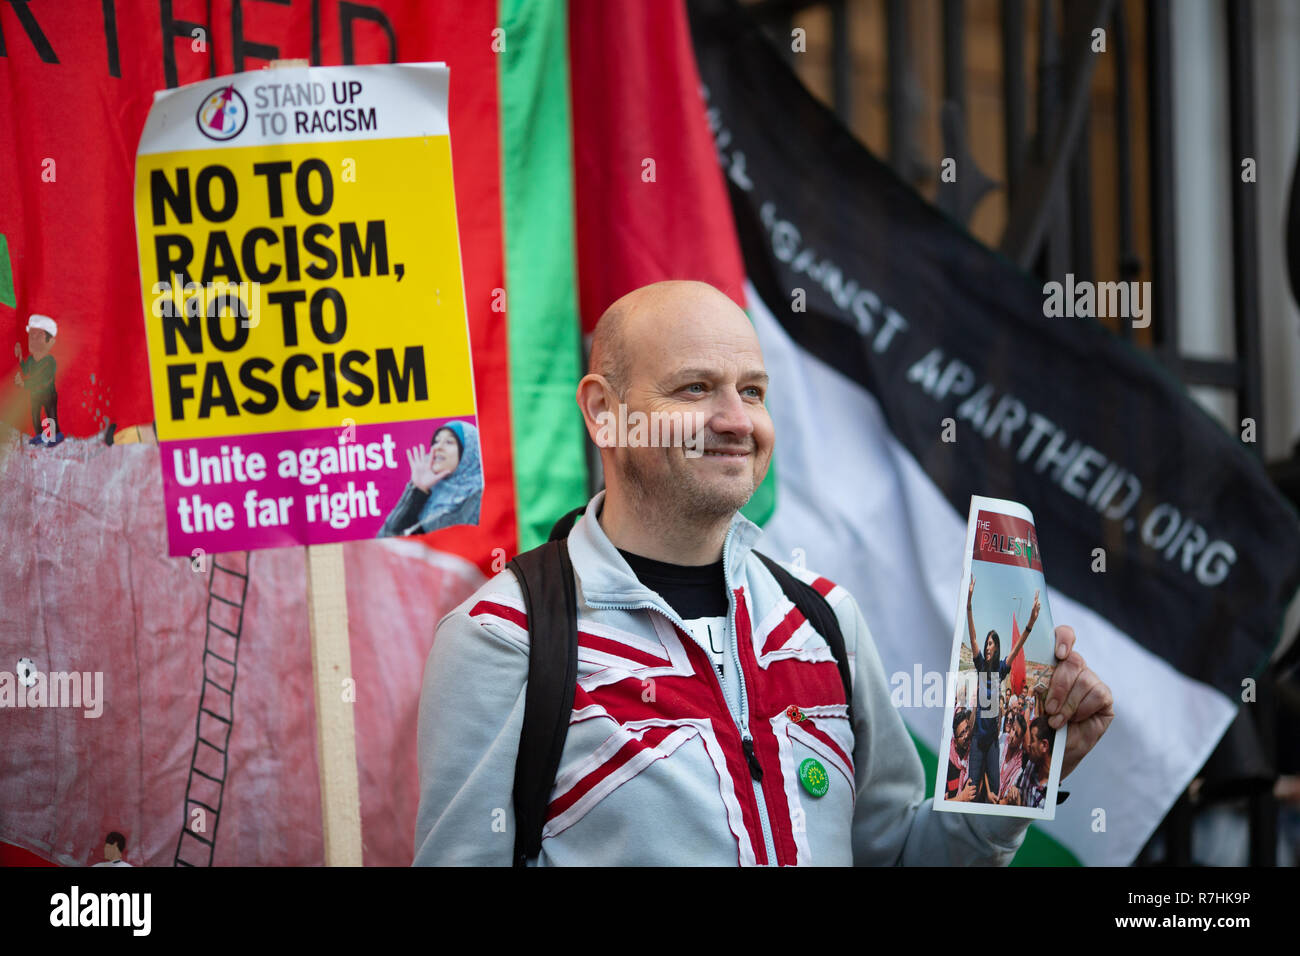 A representative of the organisation 'Football Against Apartheid' holds an Anti-Facism sign and poses next to the Palestinian flag.  3,000 Pro-Brexit demonstrators and 15,000 Anti-Facist counter demonstrators took to the streets of London to voice their stance on the deal ahead of the key Brexit vote in parliament this Tuesday. Stock Photo